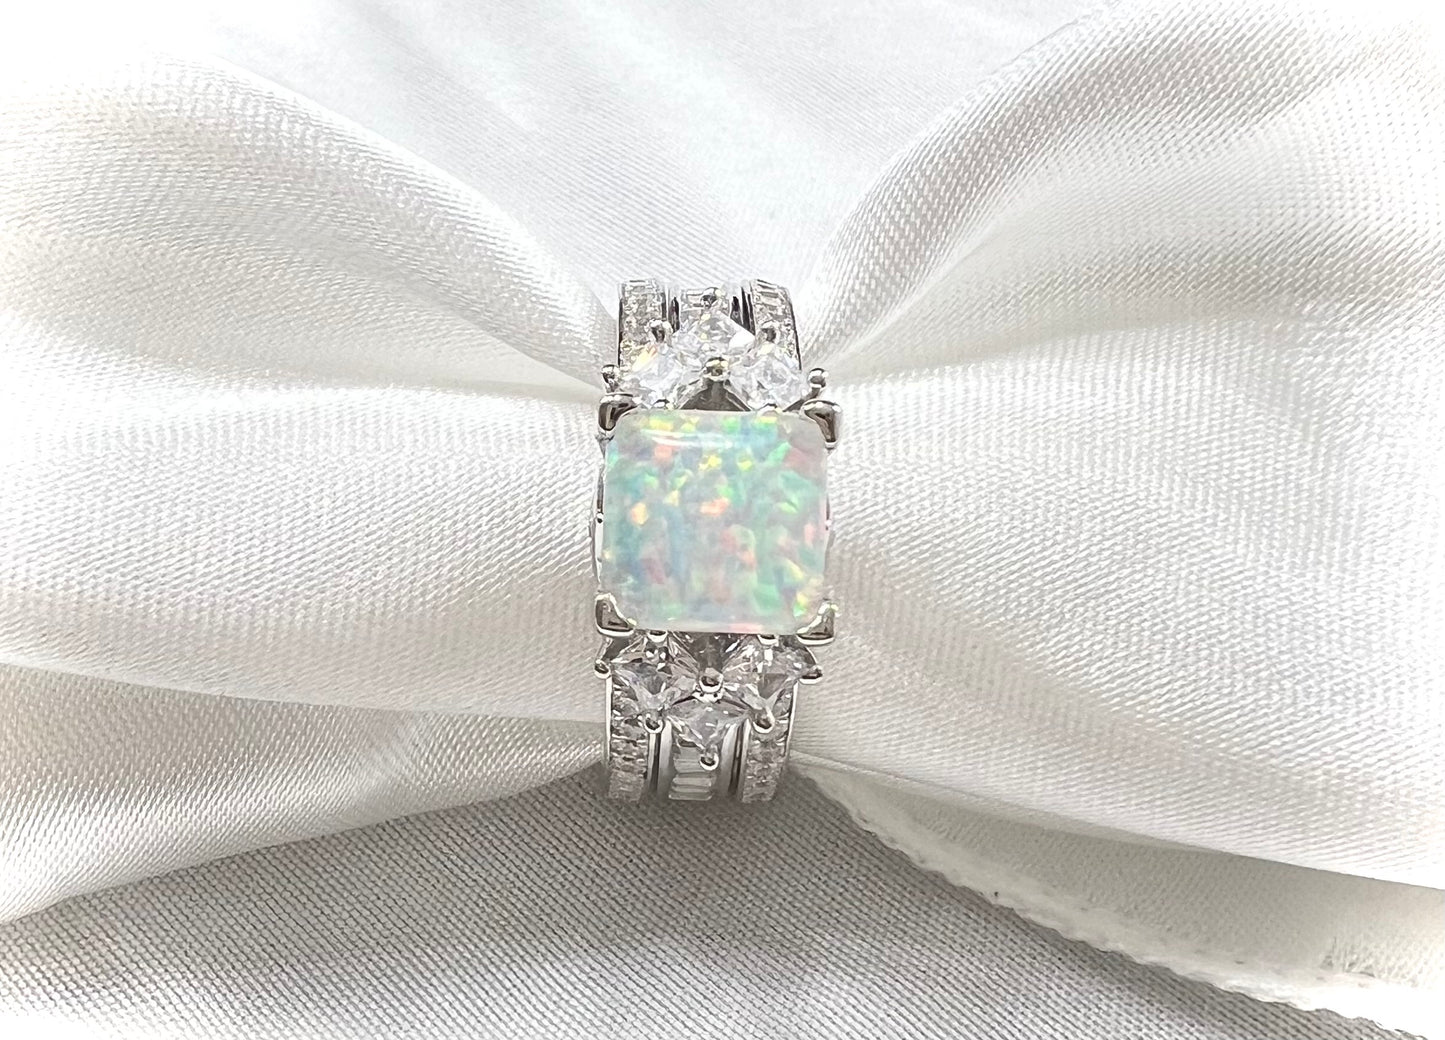 925 Sterling Silver Princess Cut, White Crystal Opal & Clear CZ Tri-Band Ring